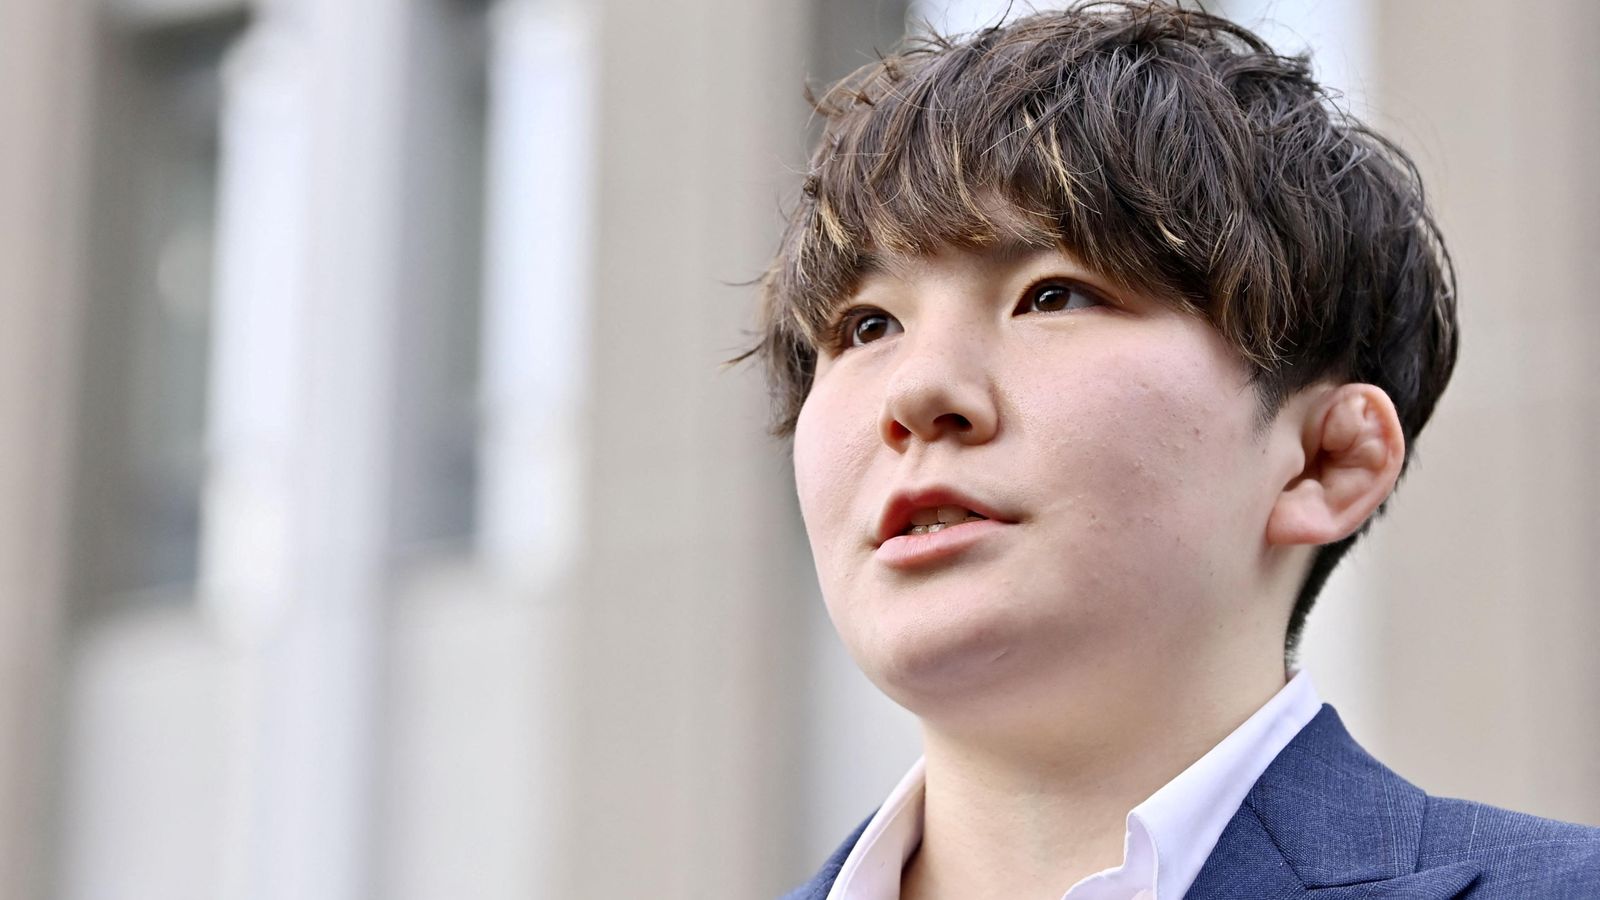 Rina Gonoi: Three ex-Japanese soldiers found guilty of sexually assaulting colleague who spoke about her ordeal on YouTube